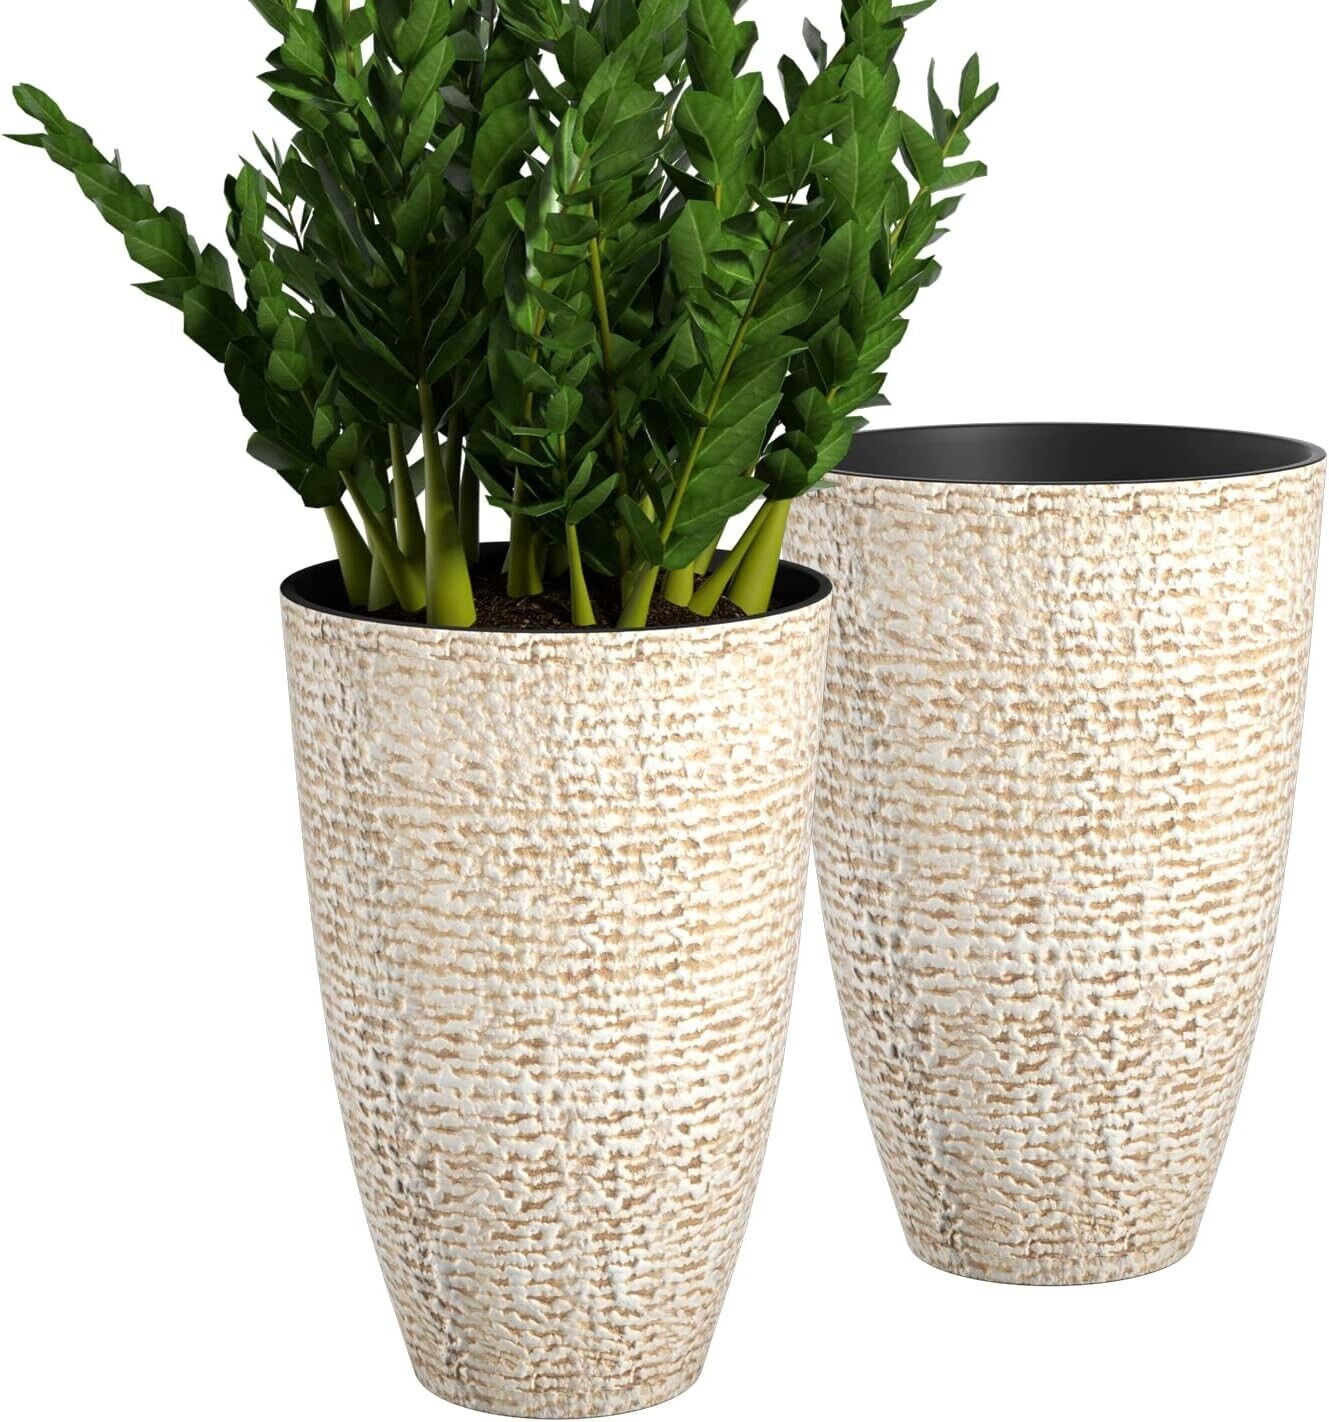 21 Inch Tall Planters Set of 2, Planters for Outdoor Indoor Plants Large Round